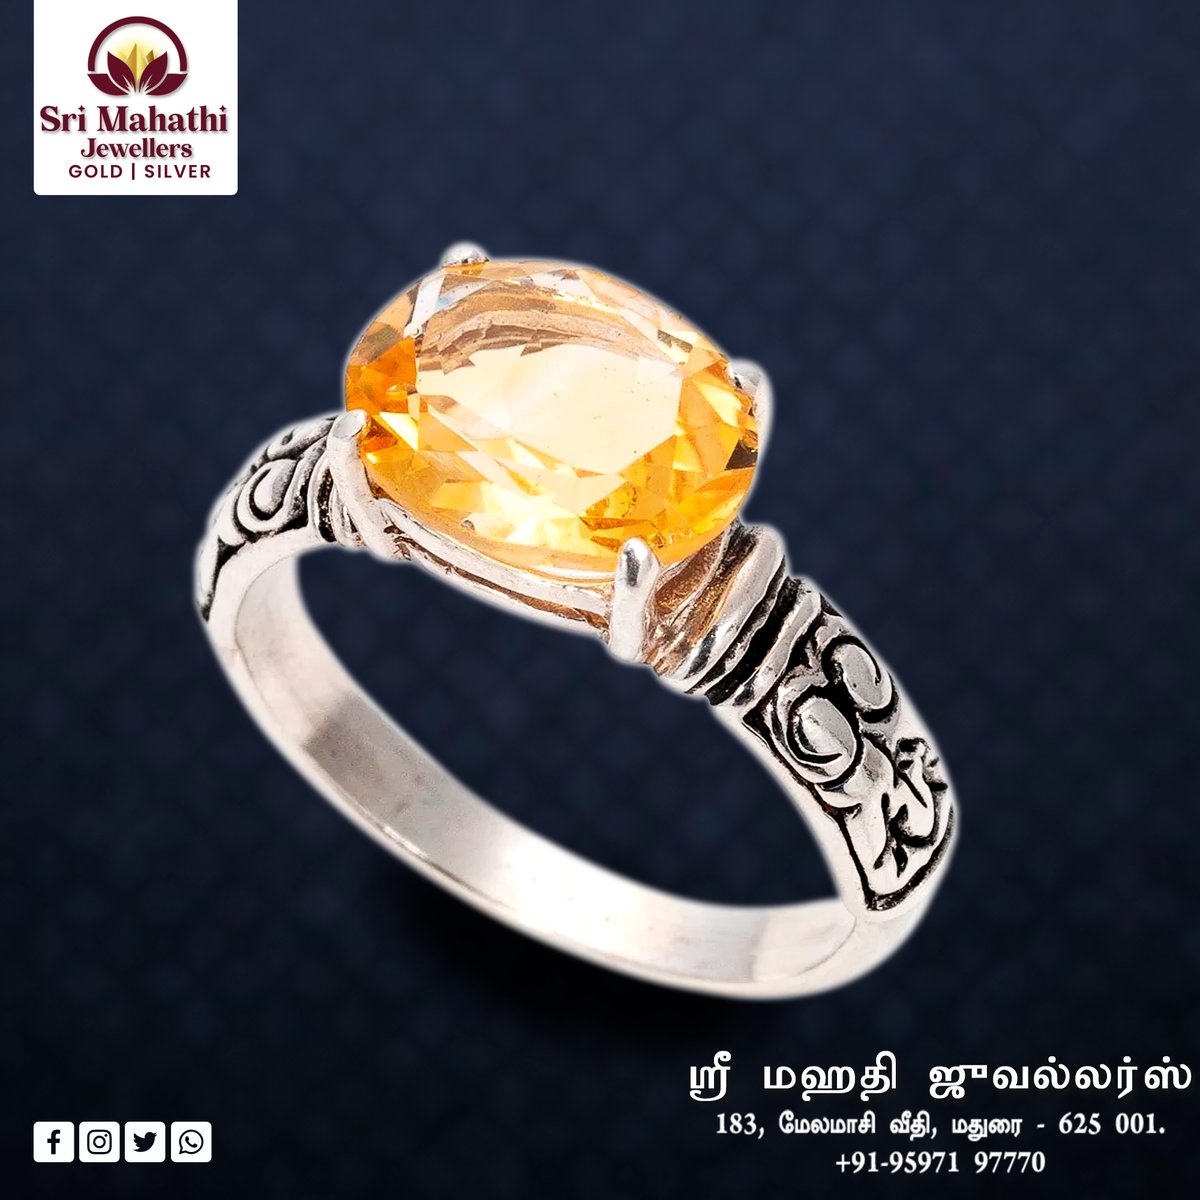 Silver yellow gem stone ring from the house of Sri Mahathi Jewellers - Madurai.
#silvergemstonering #silveryellowstone #silverringcollection #silverring #silverringformen #SriMahathiJewellers #SriMahathiJewellersMadurai